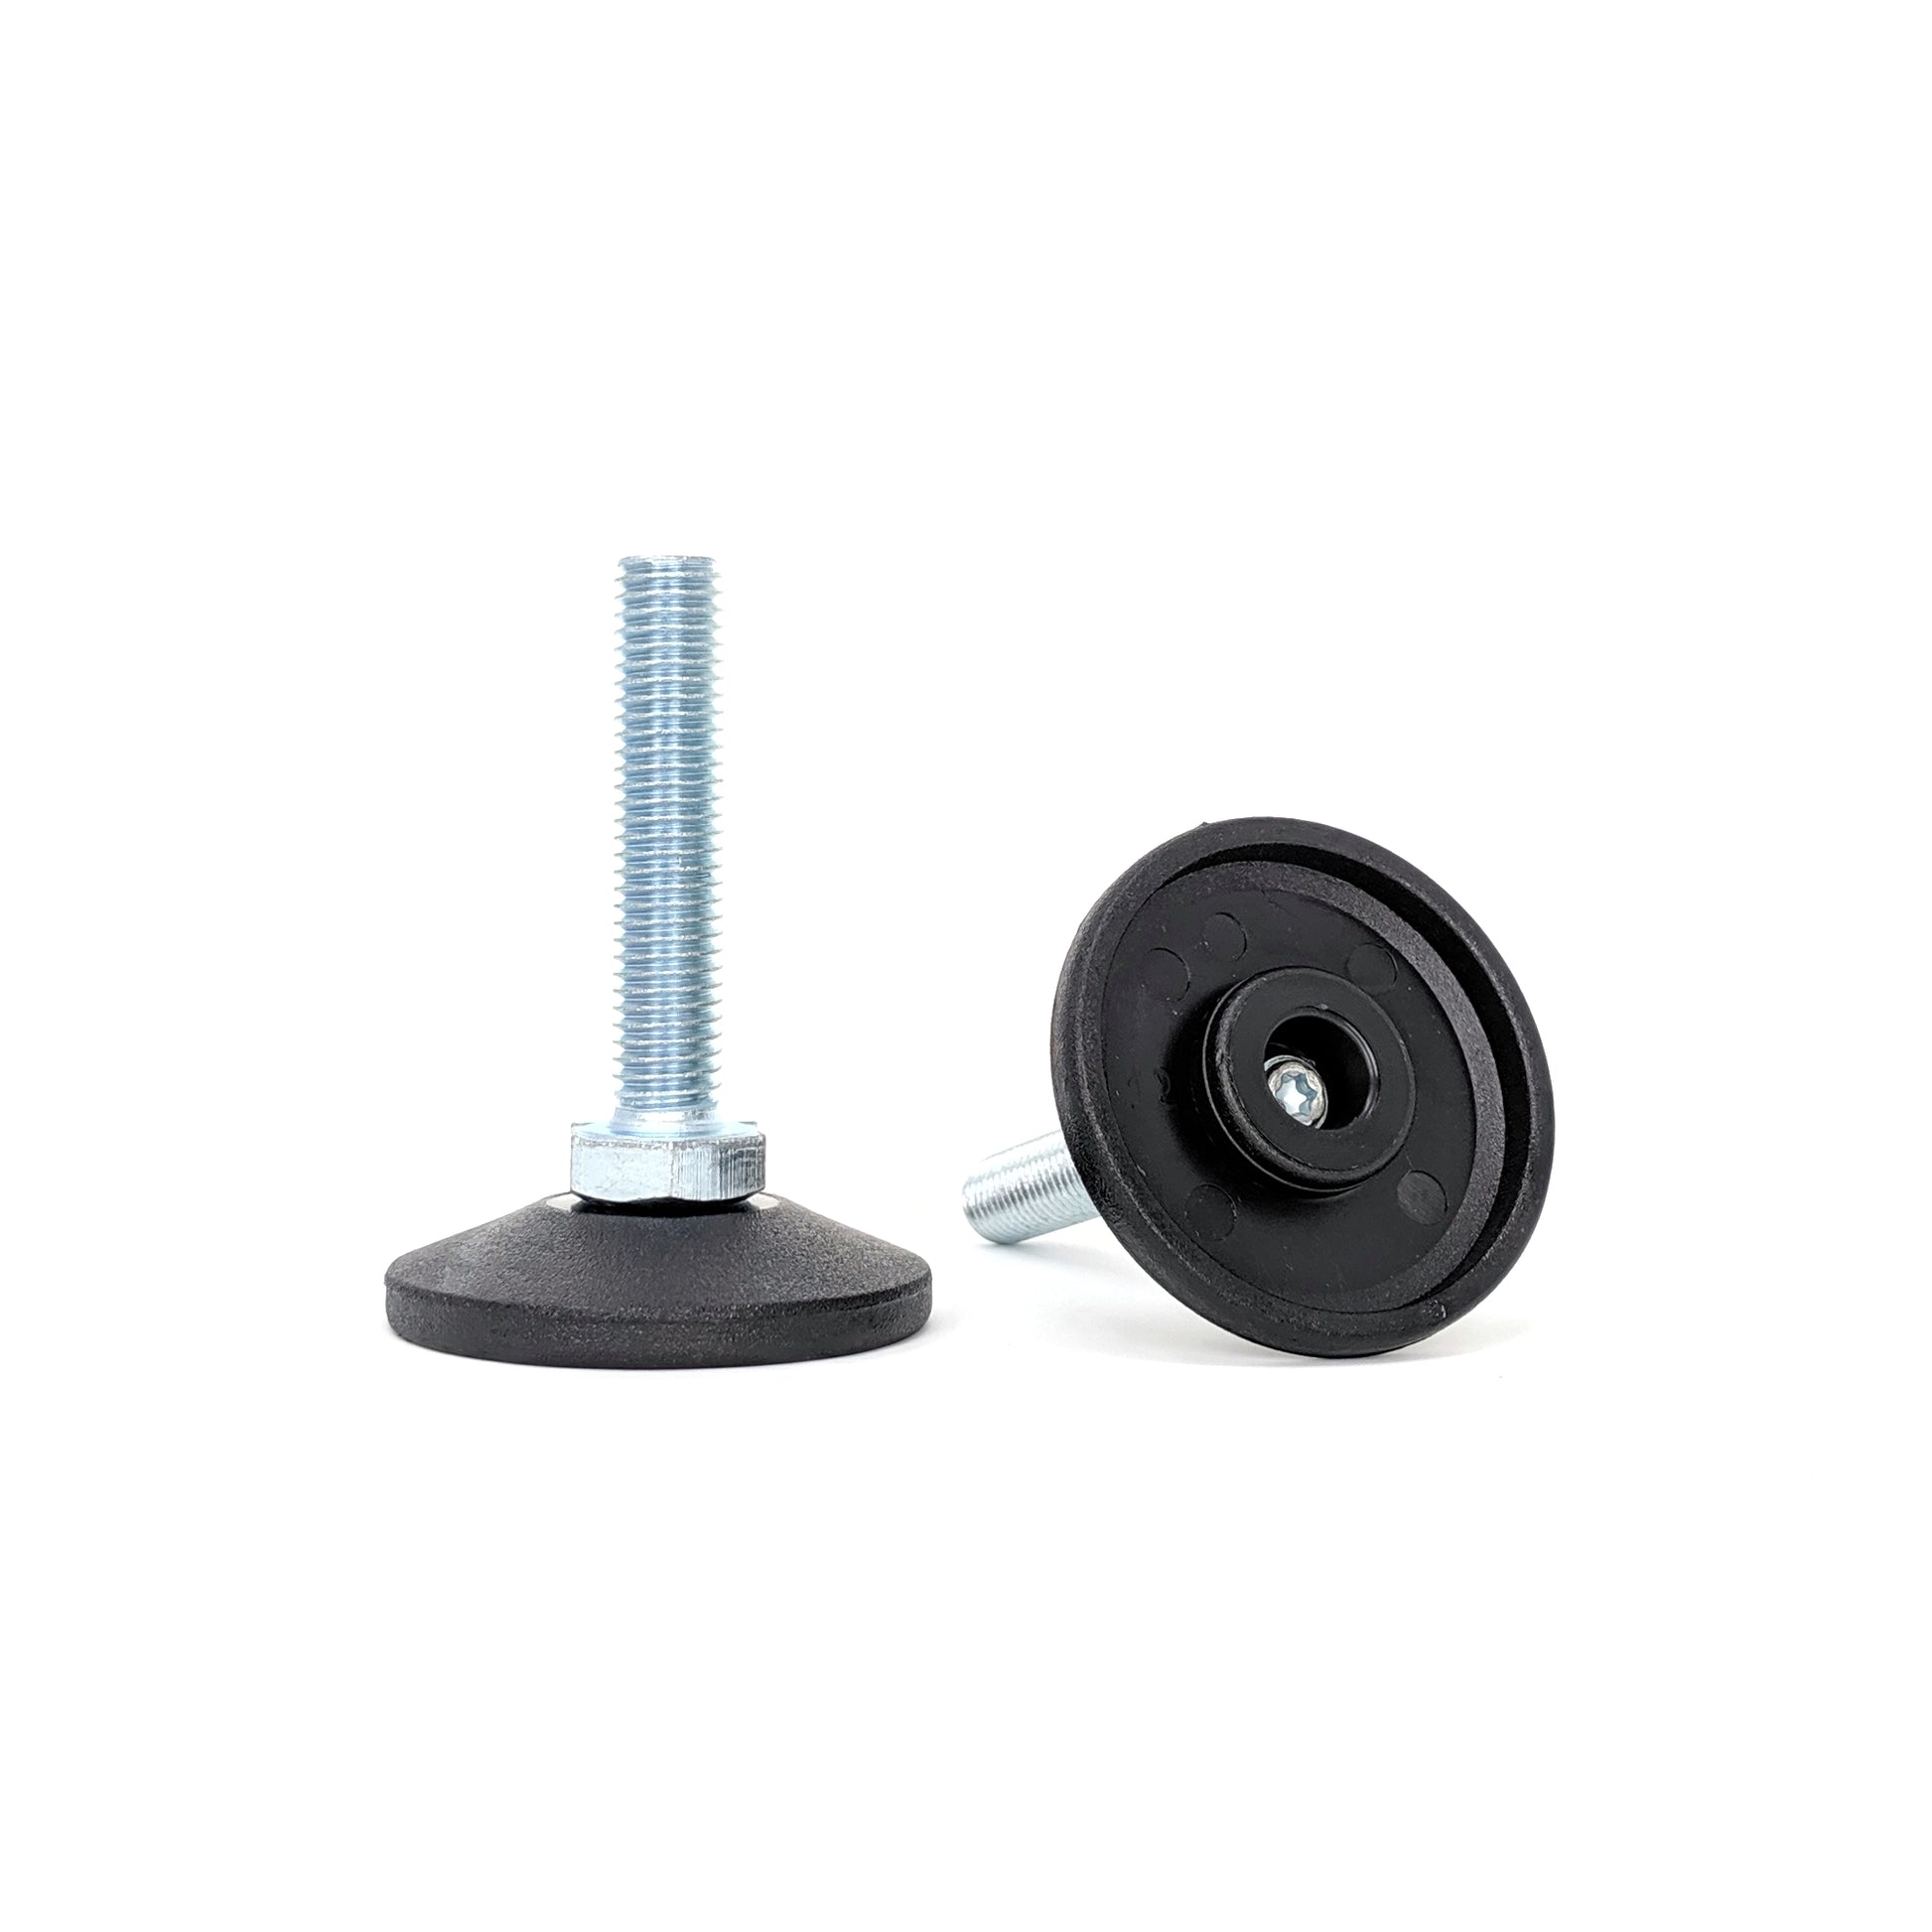 Adjustable Feet, 48mm Dia. Base, M10 50mm Thread, 550kg Static Load Capacity - Made In Germany - Keay Vital Parts